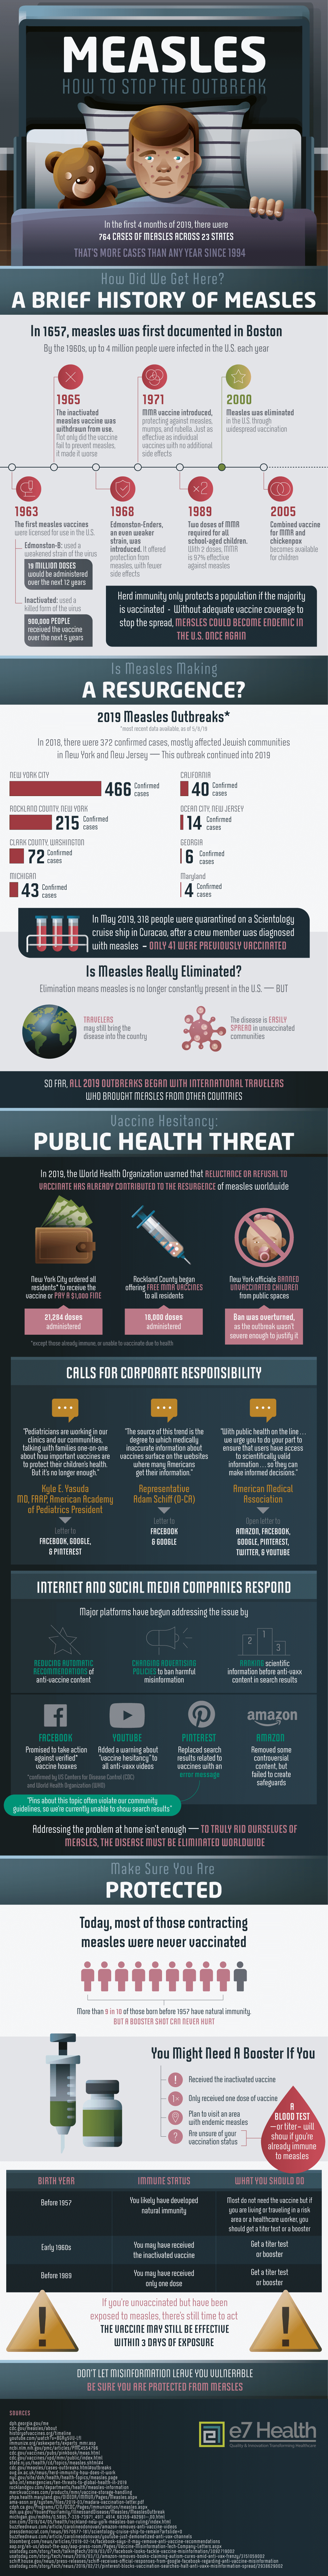 Info Graphic - Measles Stop the Outbreak